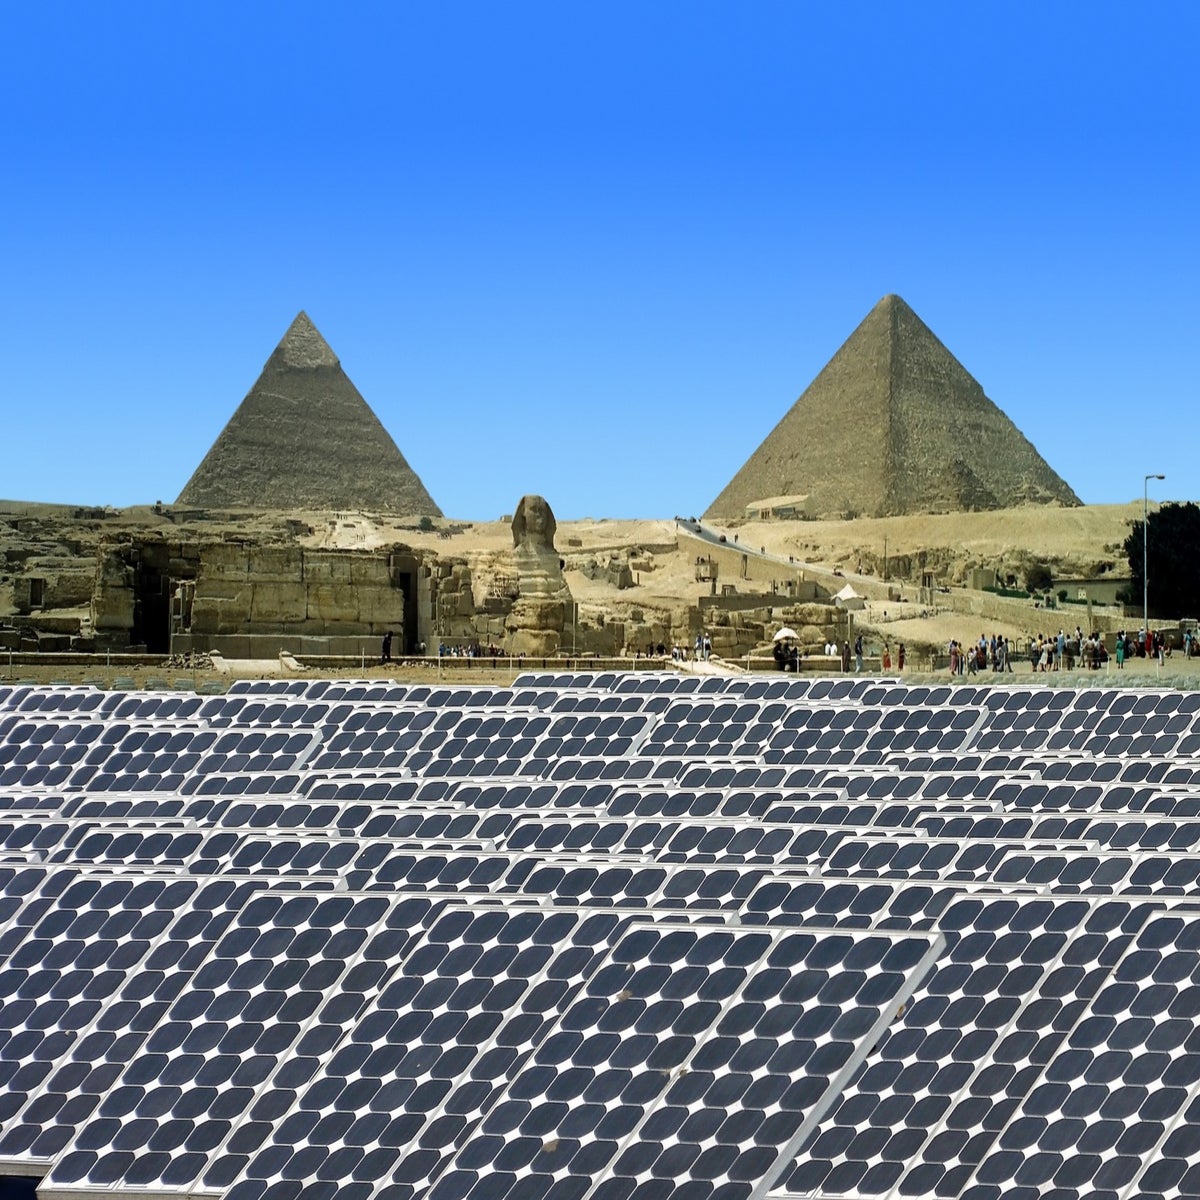 TheSocialTalks - Egypt has started a new project to use solar